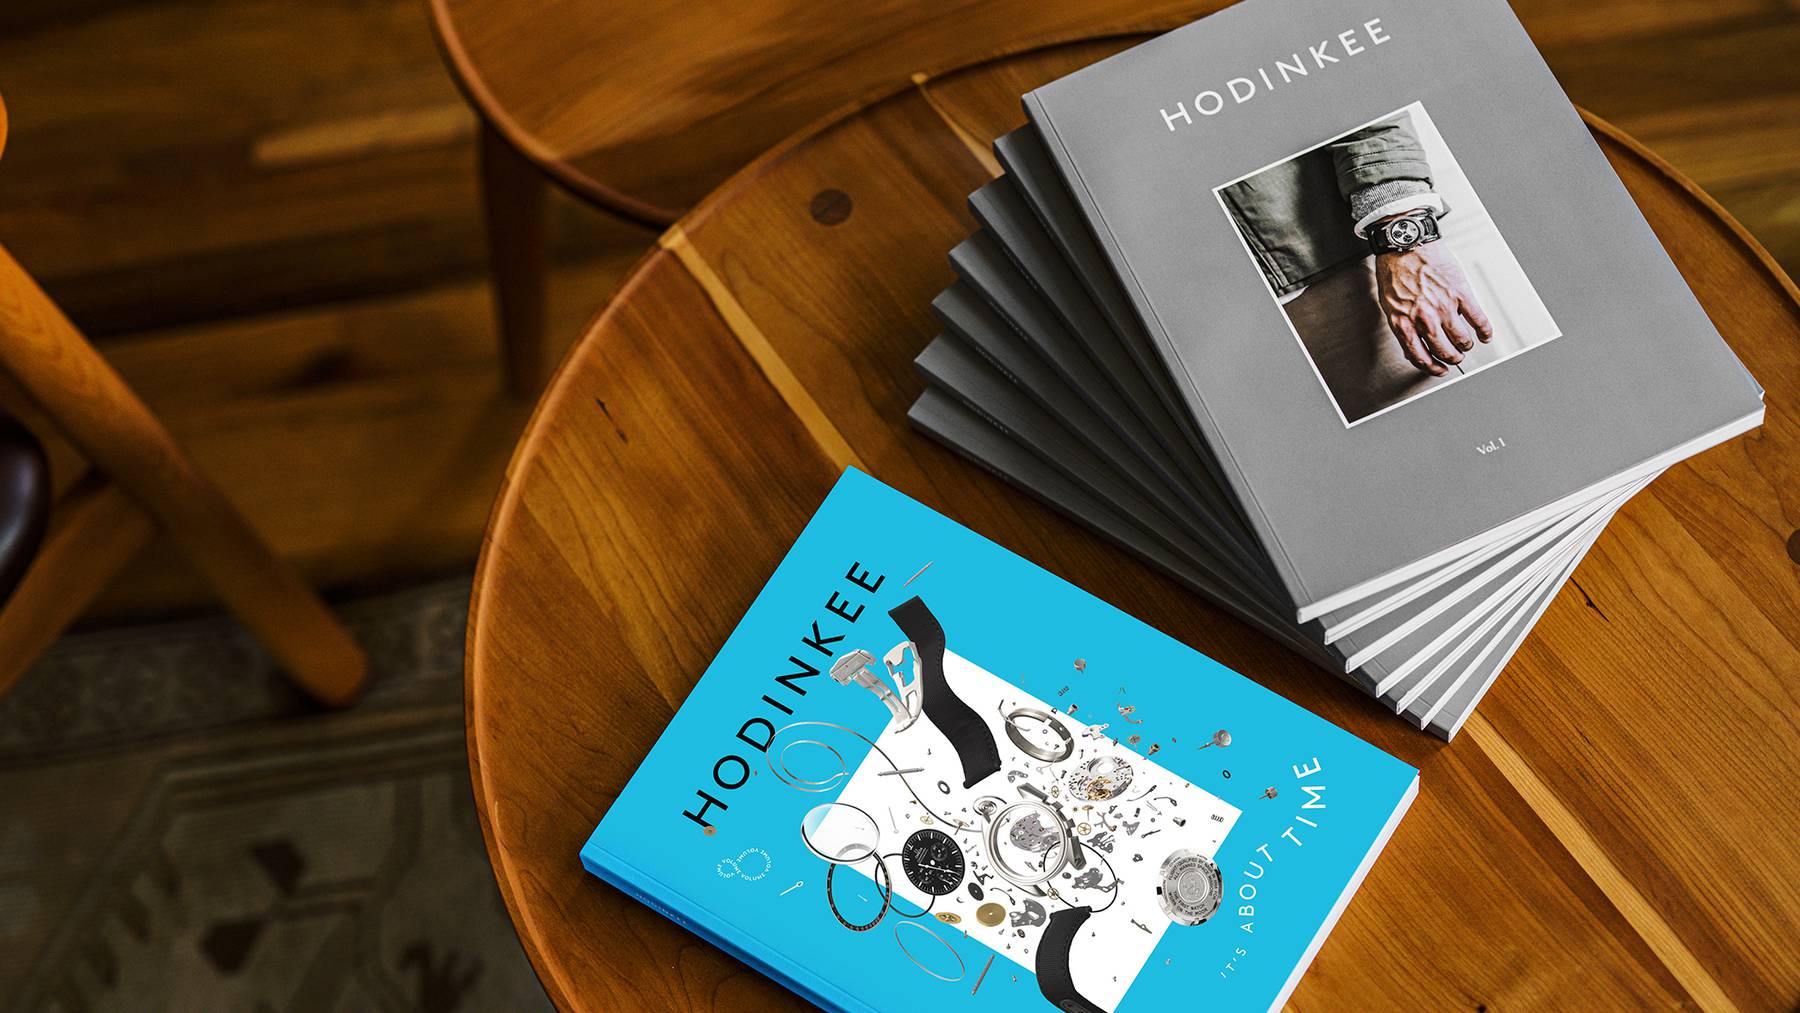 Hodinkee redesigned its magazine to appeal to a wider range of people. Hodinkee